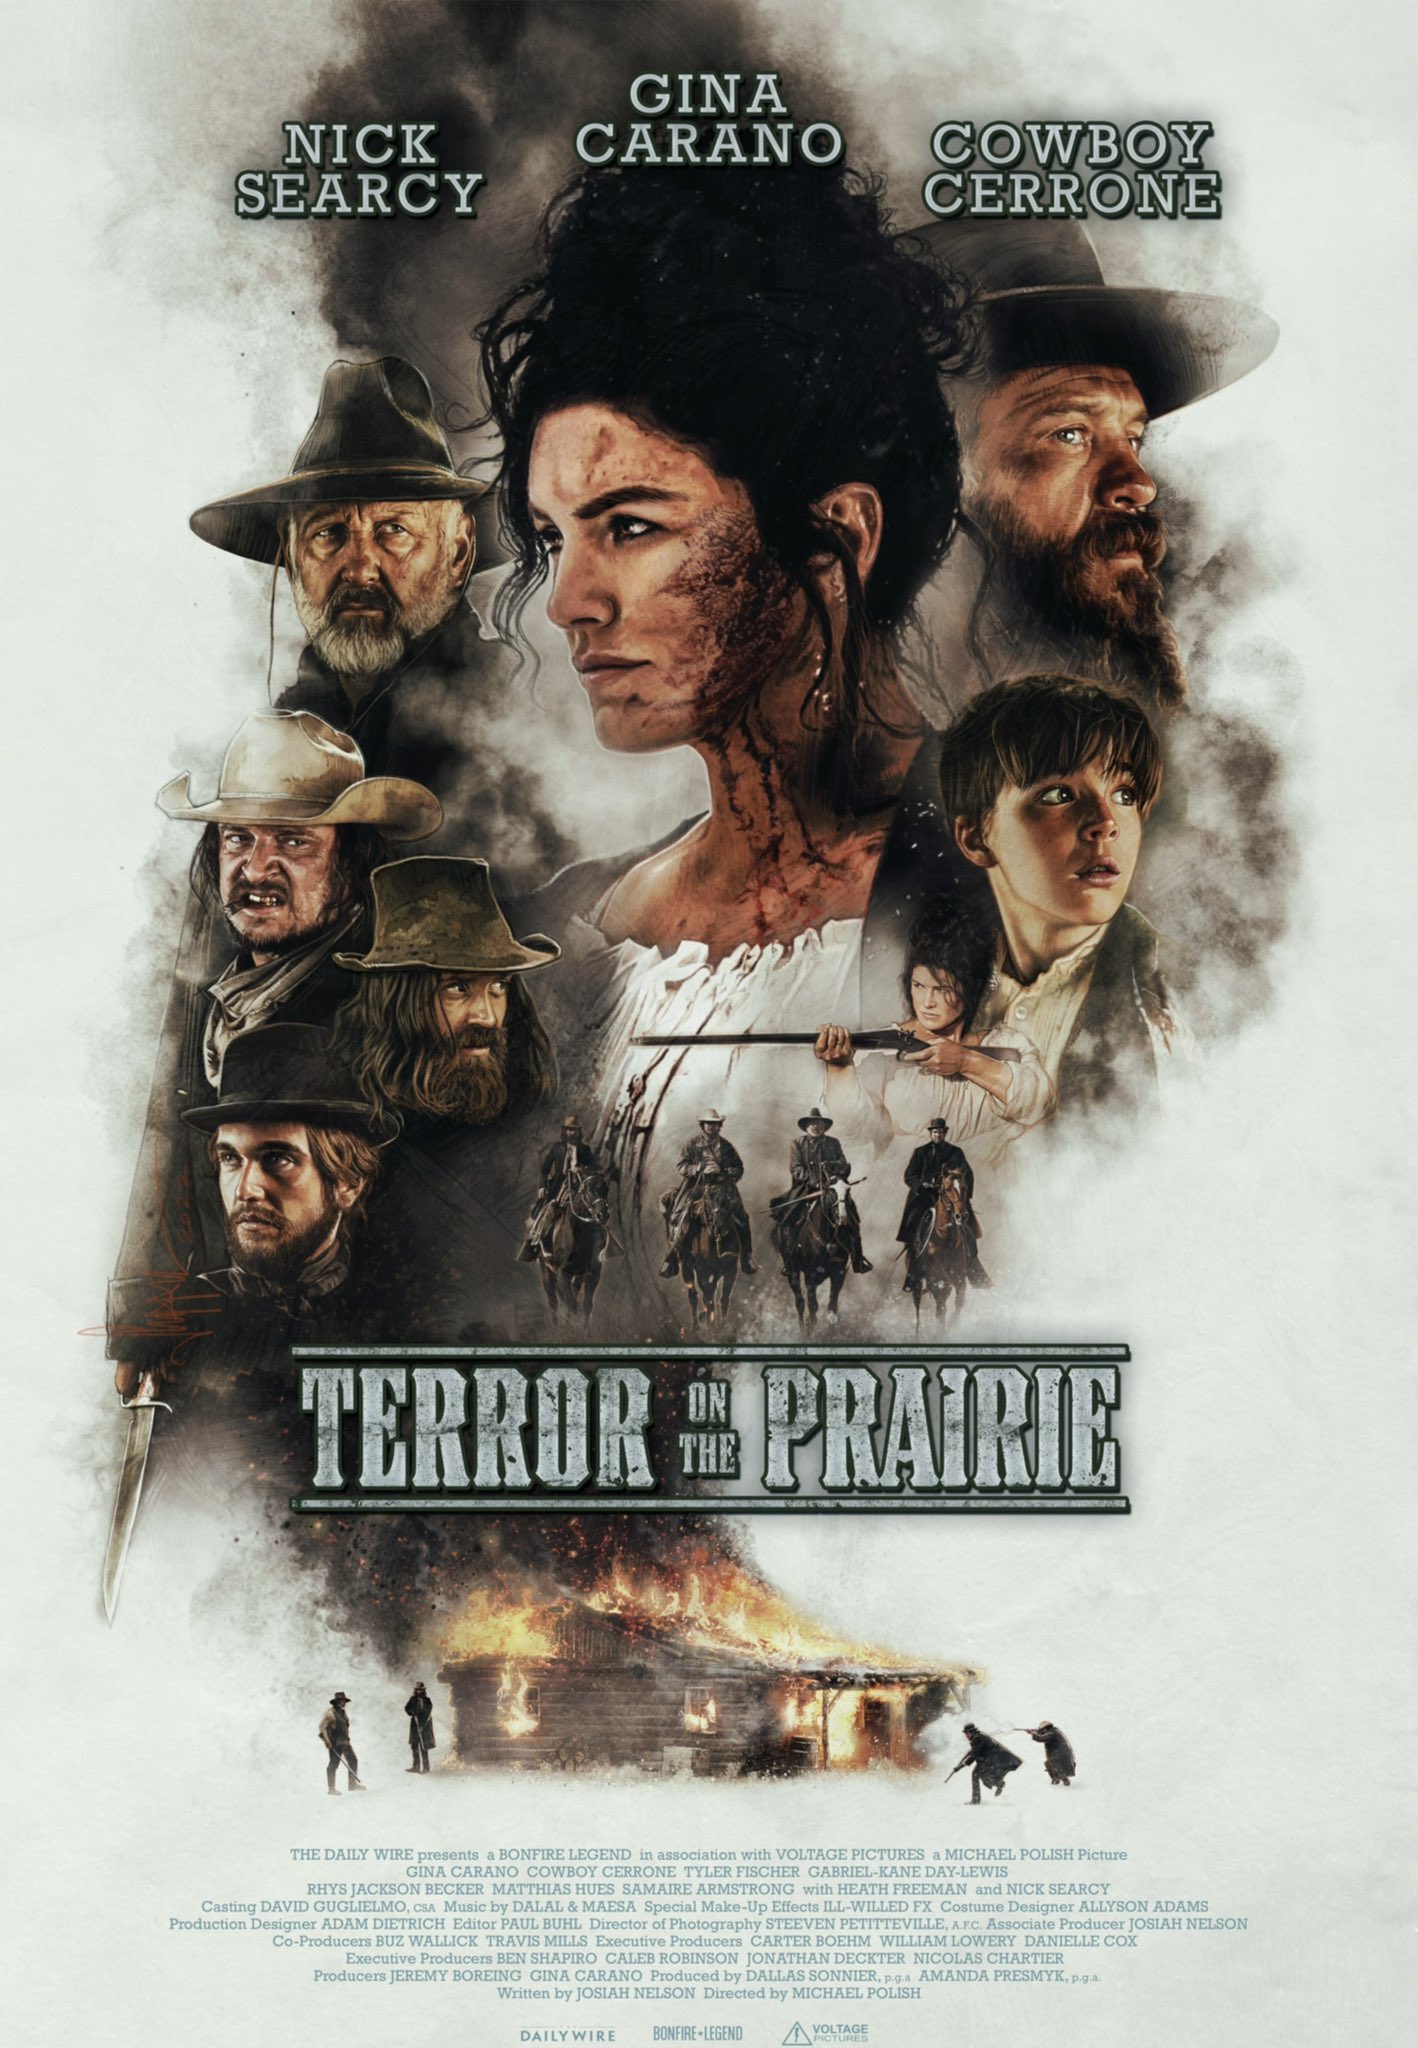 "Terror on the Prairie" Offers Excitement From Daily Wire in New Trailer, Release Date